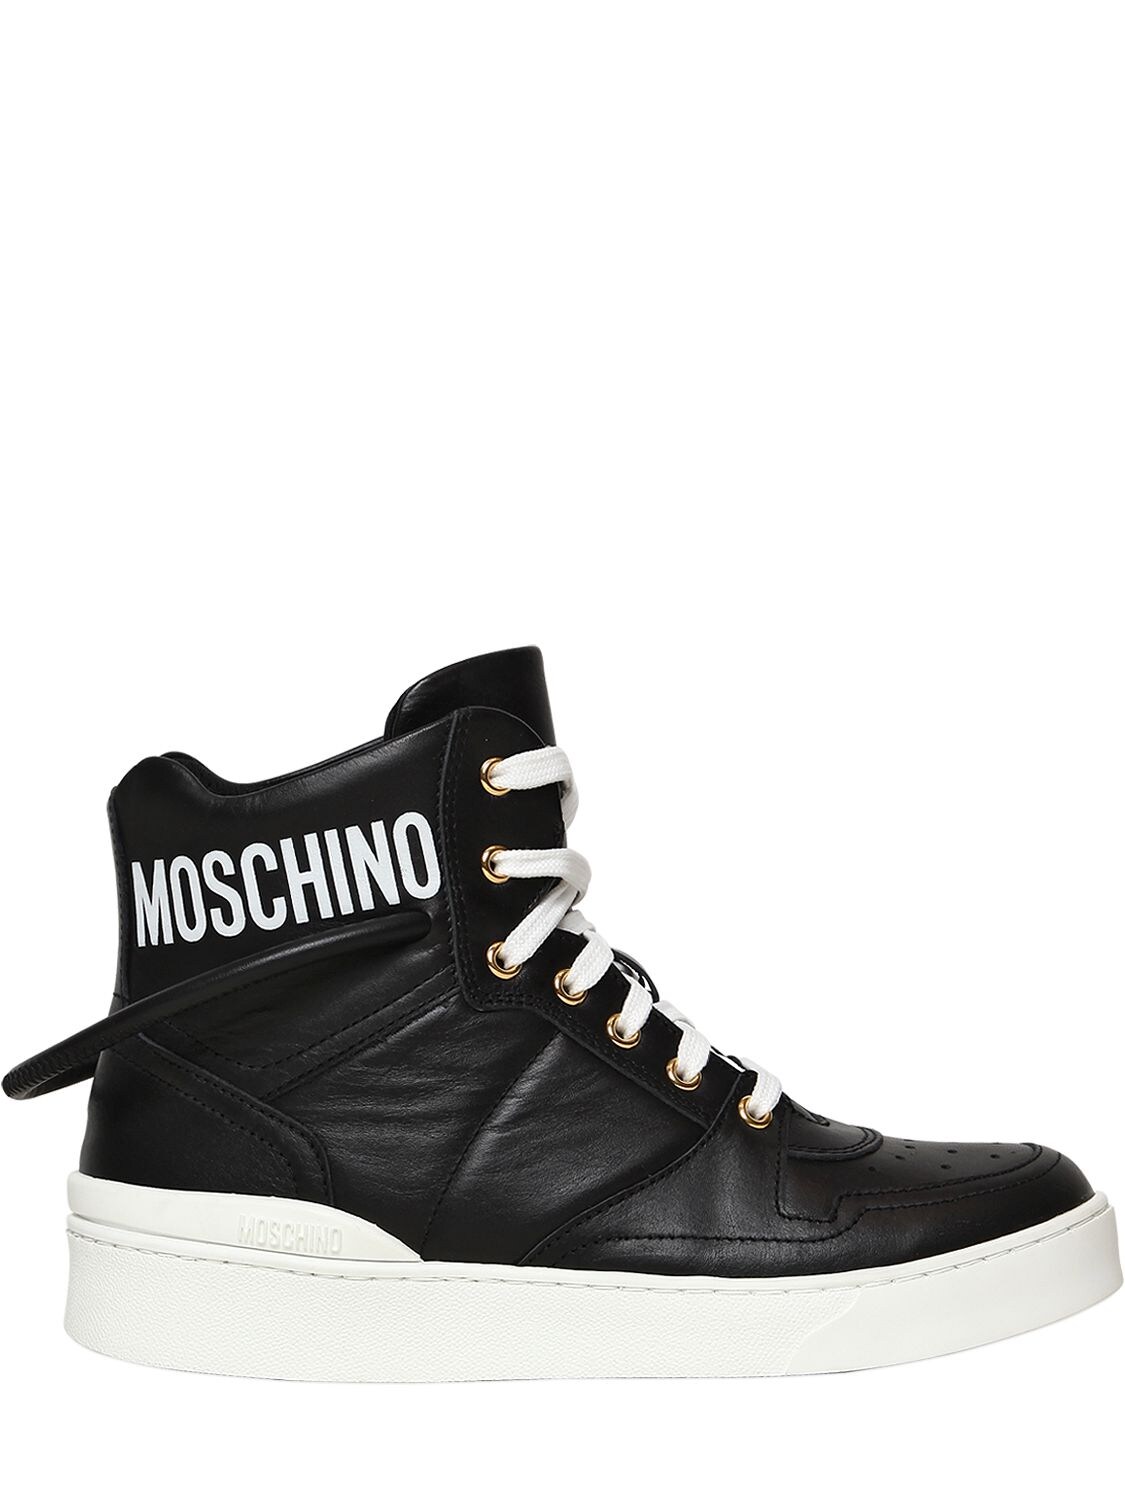 MOSCHINO 20MM LEATHER LOGO HIGH TOP SNEAKERS,66IAOF002-MDBB0